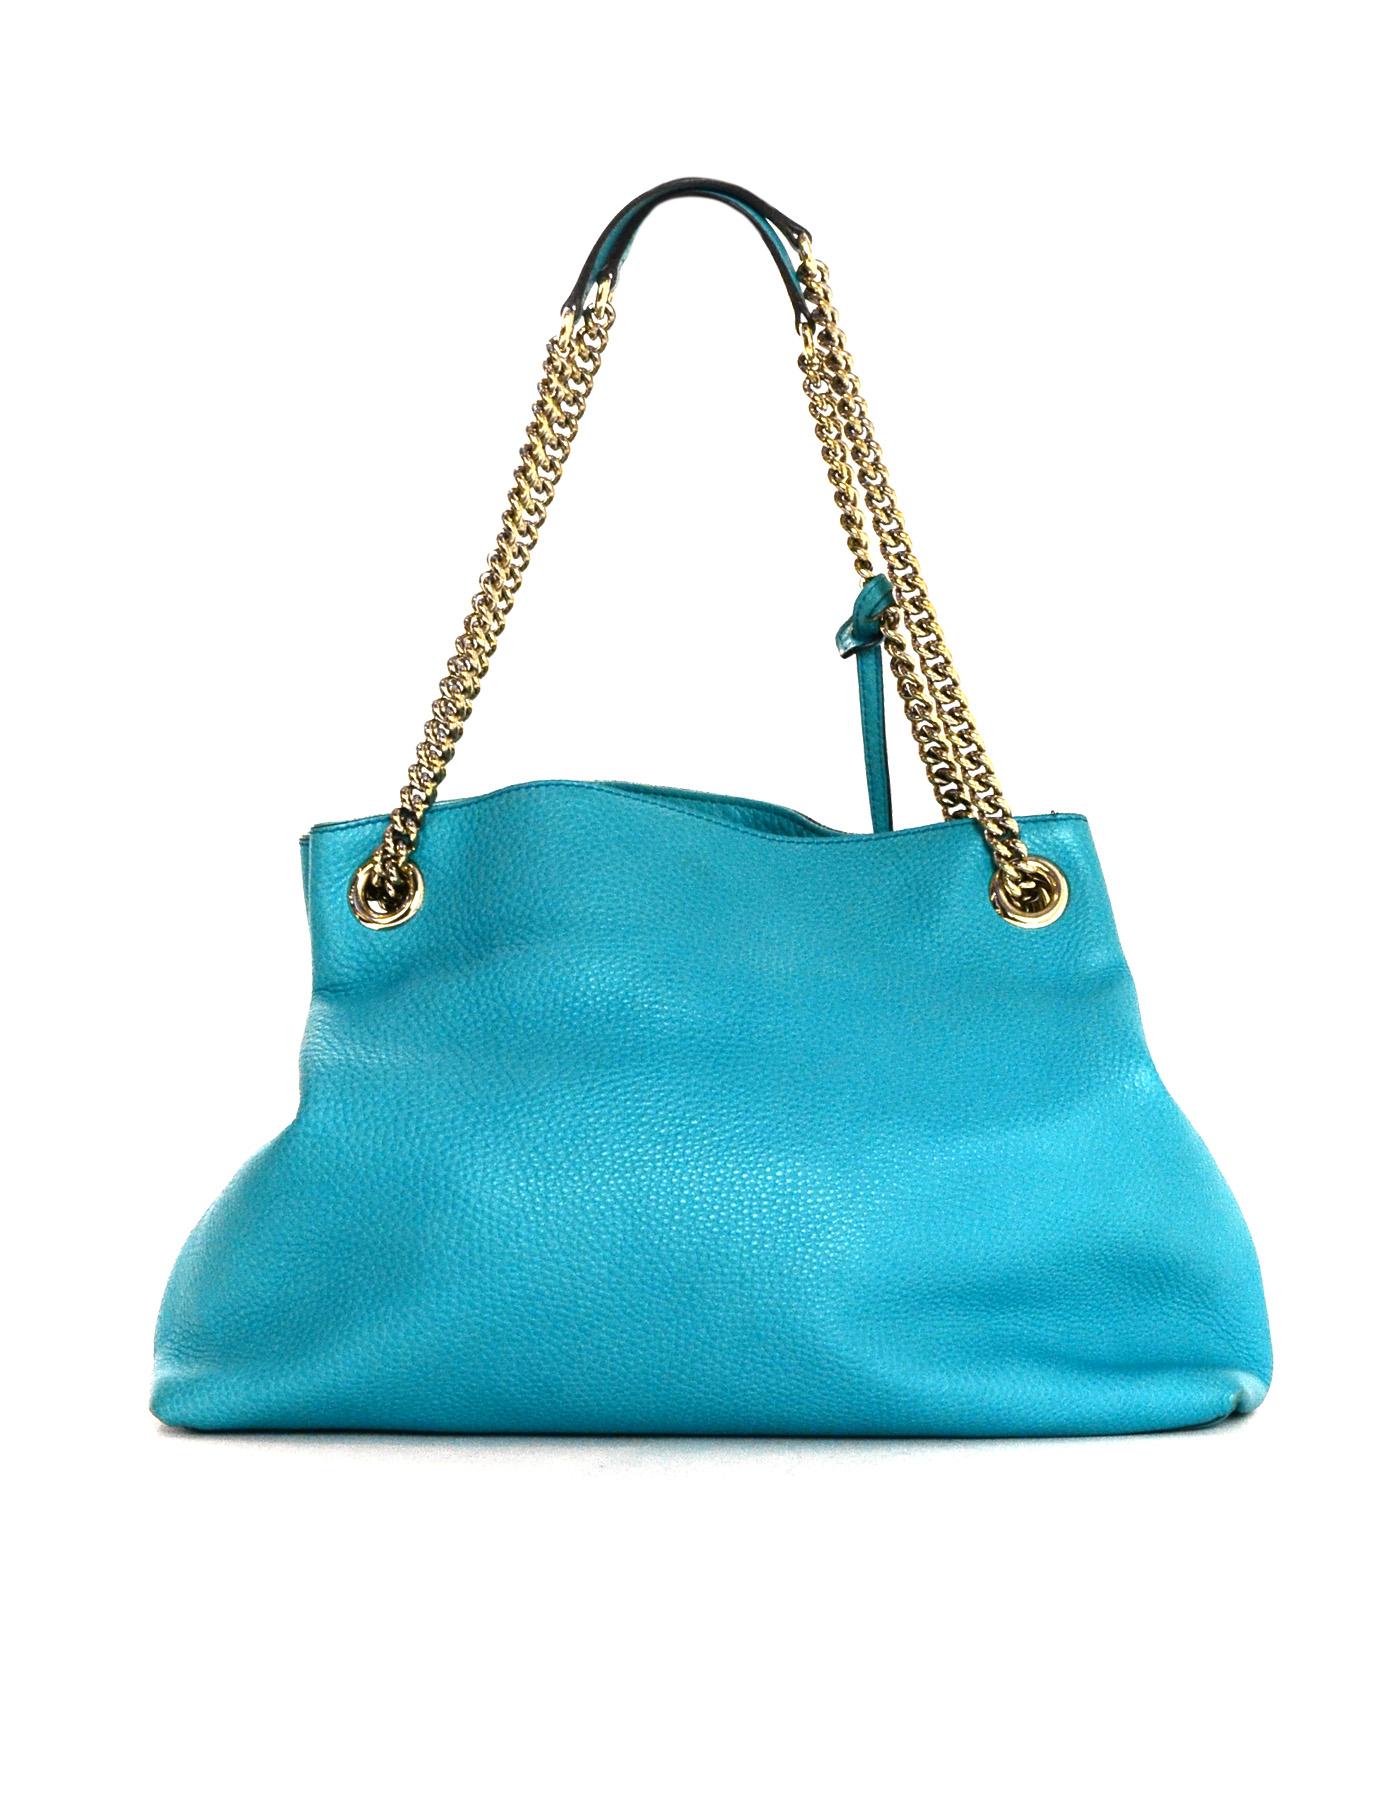 Blue Gucci GG Logo Turquoise Pebbled Leather Soho Chain Tote Tassel Bag